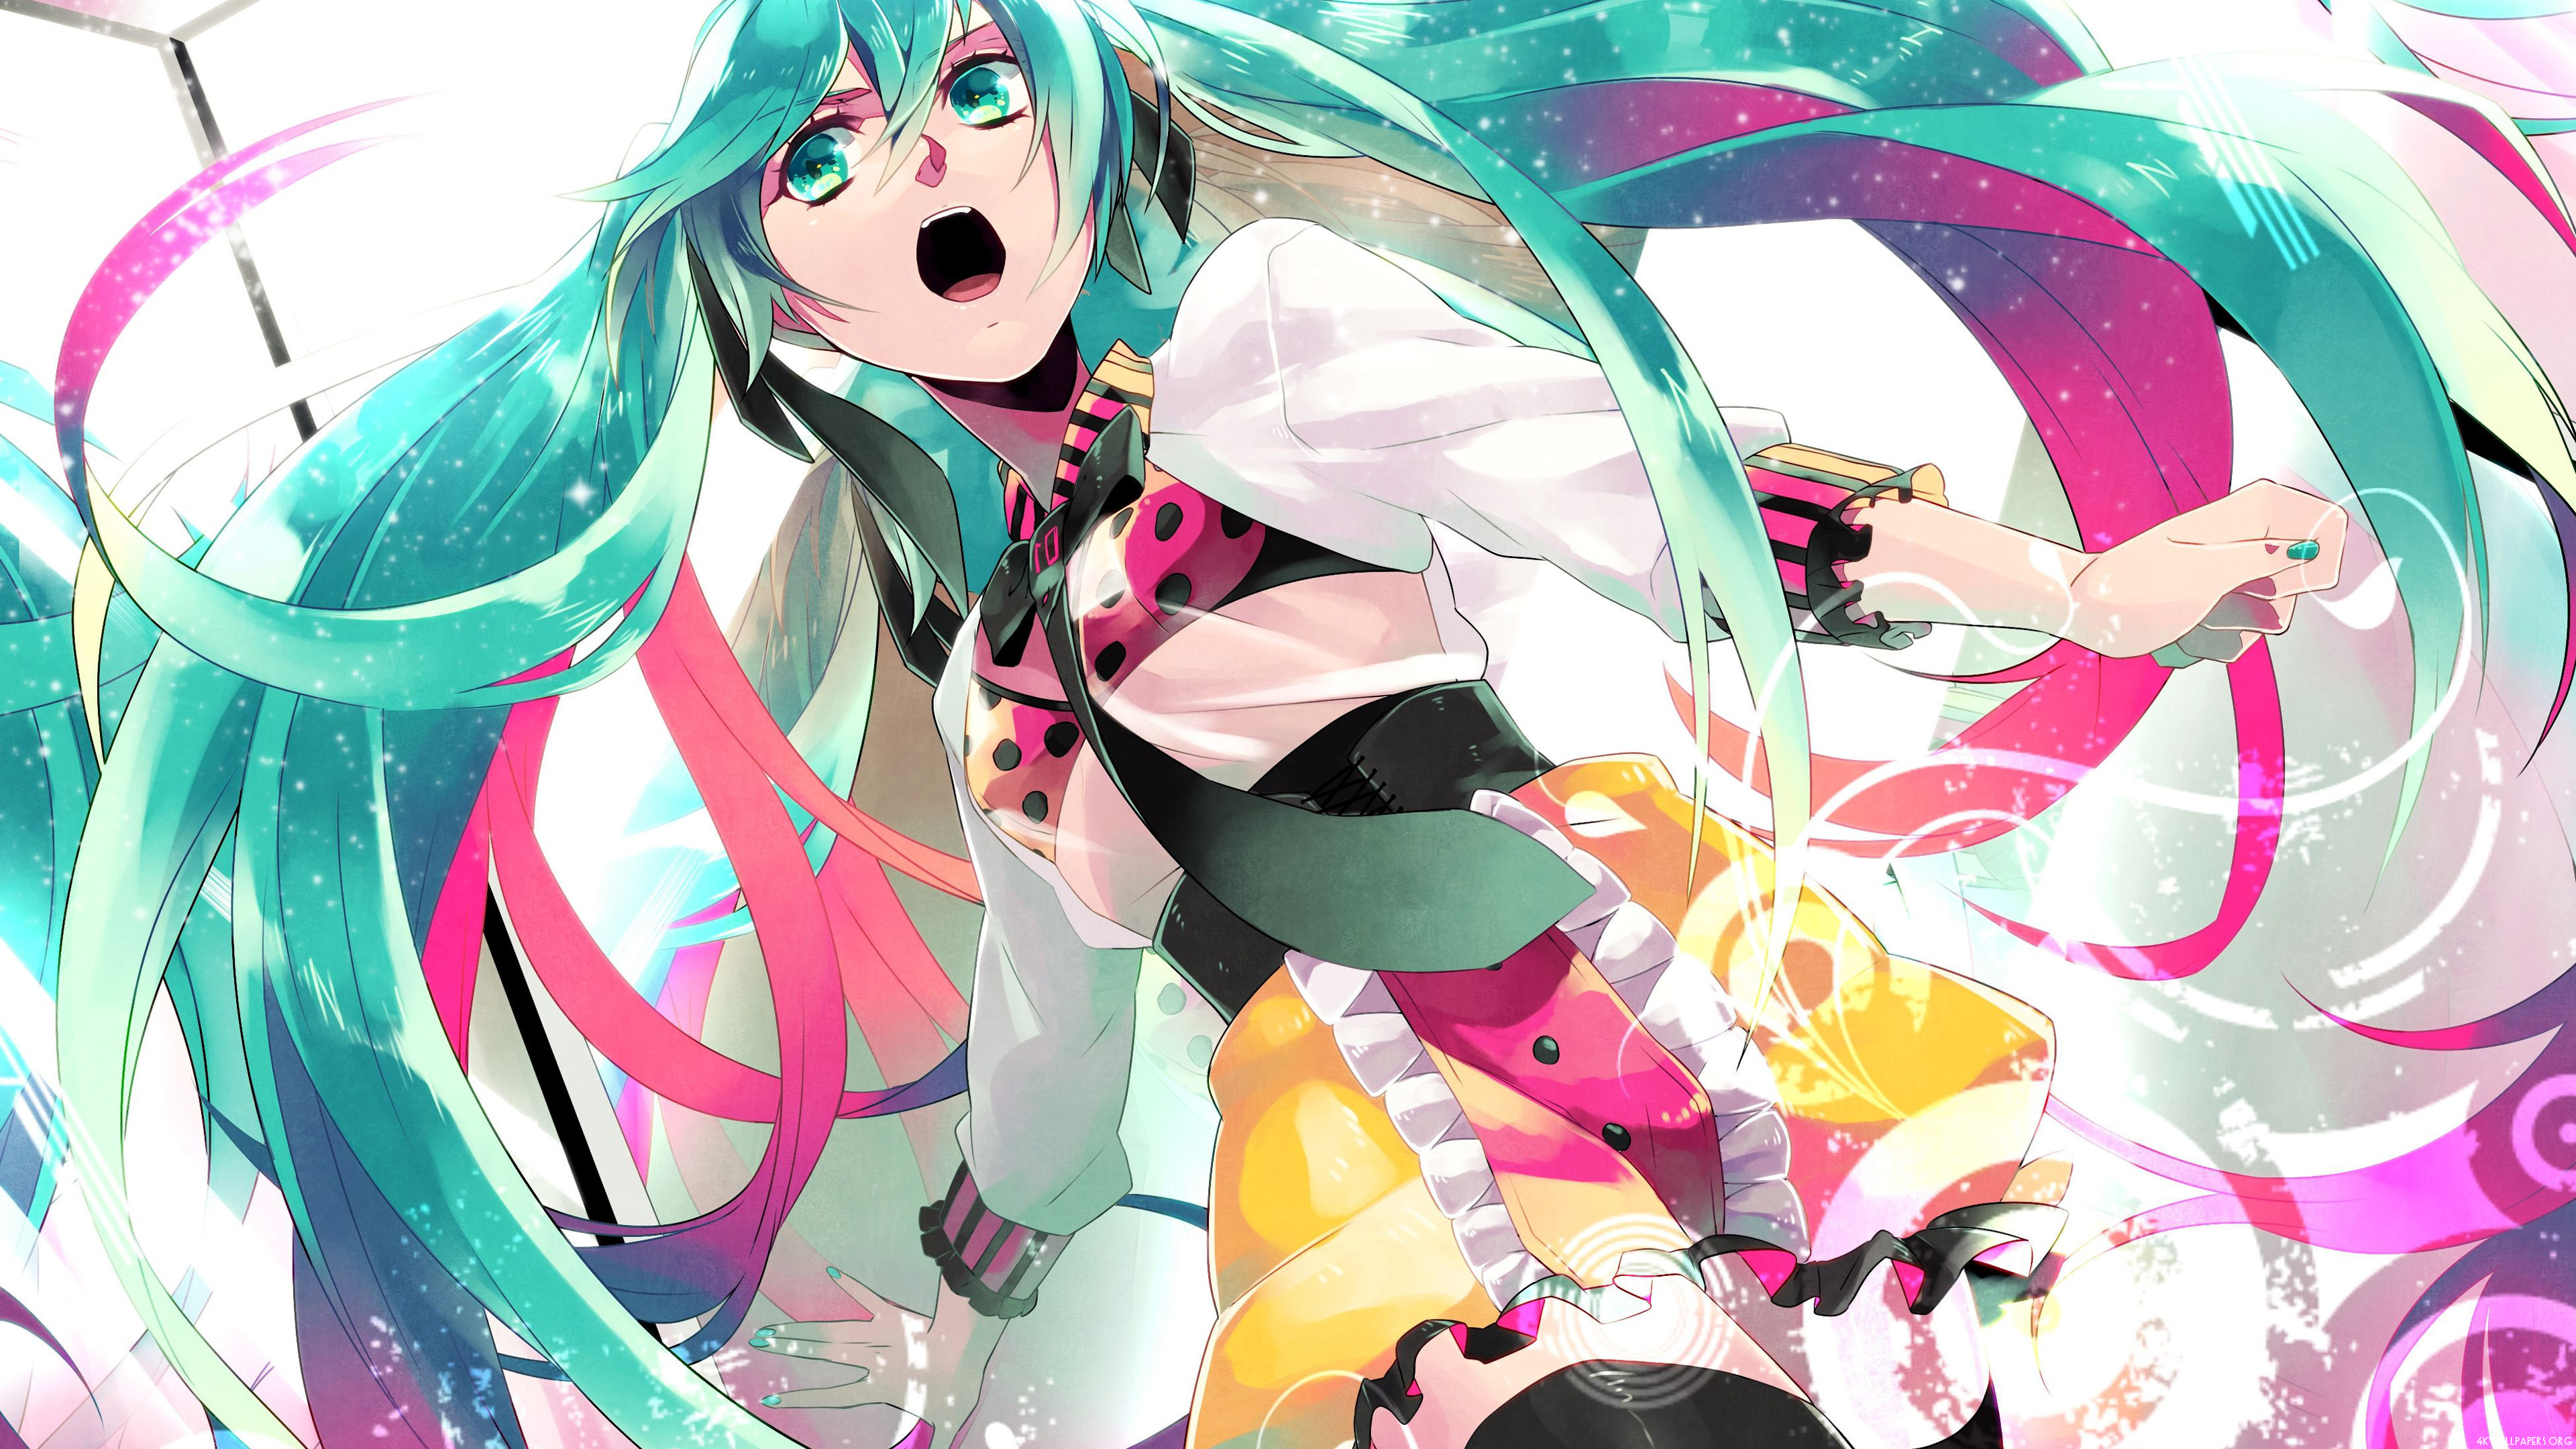 Vocaloid Wallpaper Vocaloid Wallpapers For Free Download Lily Vocaloid Wallpaper 4k 3840x2160 Wallpaper Teahub Io